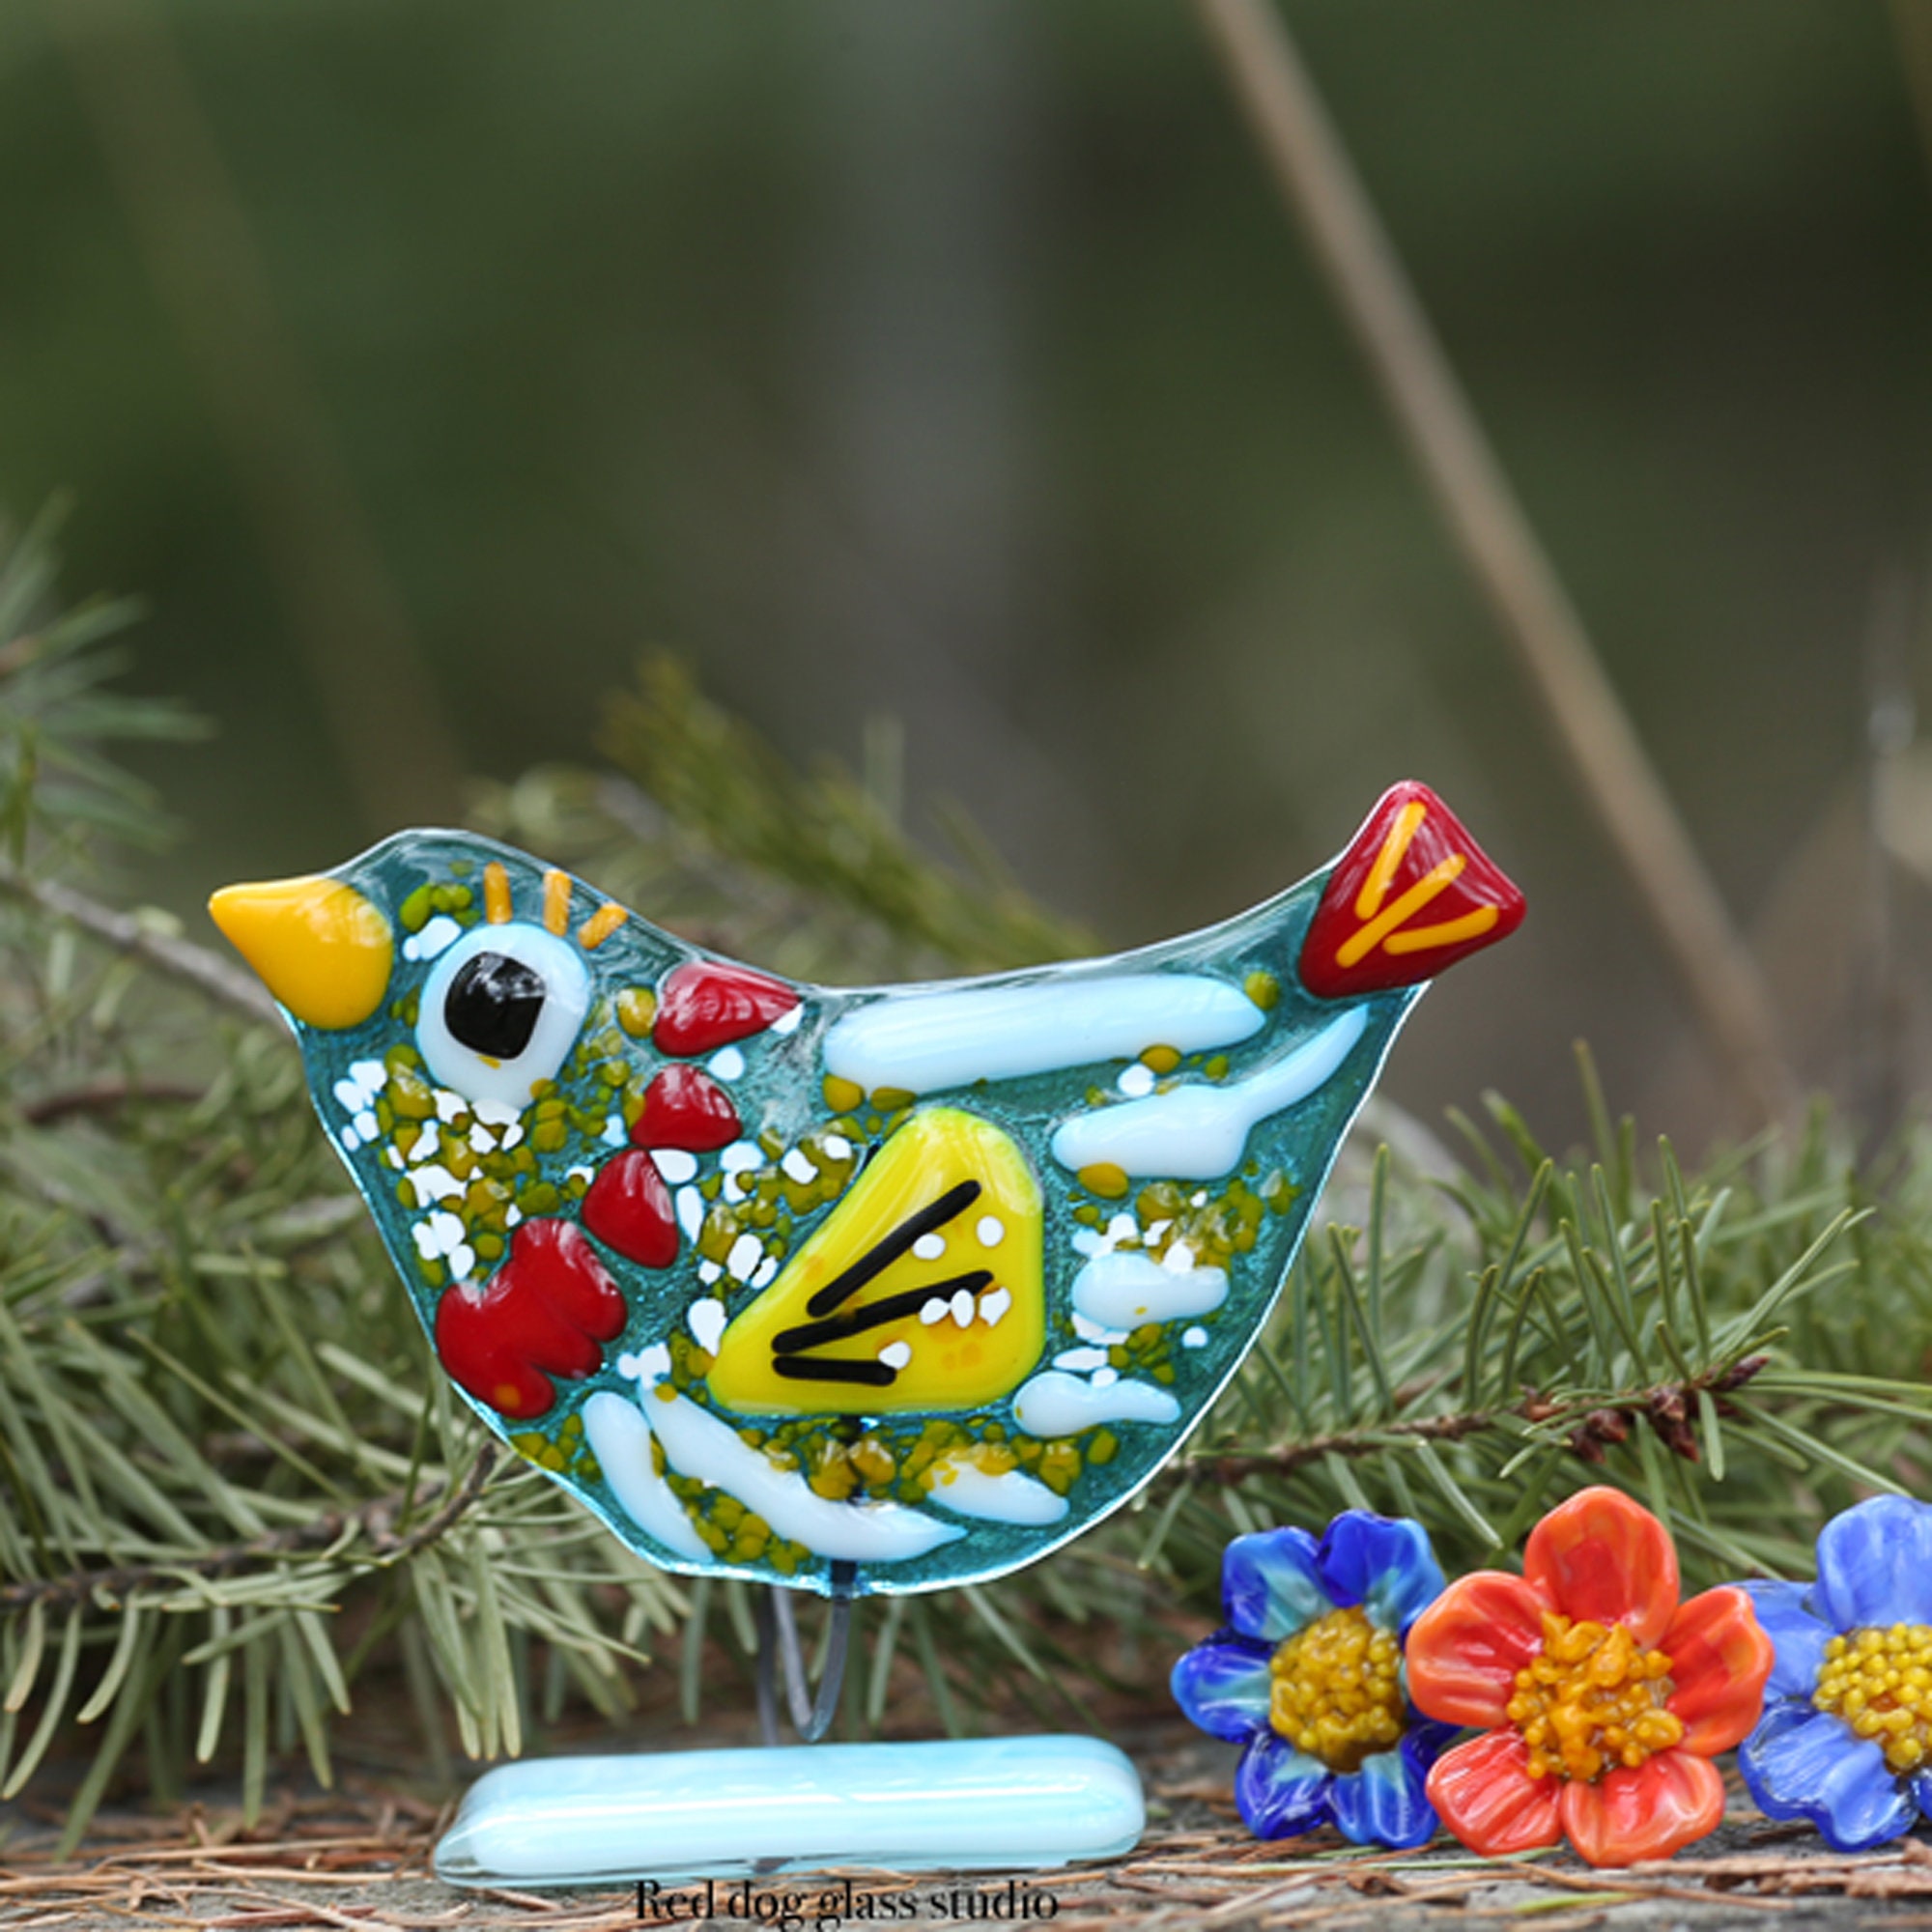 discount sales fused Ornament glass Fused Glass colorful whimsical Facing,  Tit handmade glass bird Sitting sculpture home décor Log, Blue on a nature  figurine Front spring ornament windowsill mantle décor glass art 